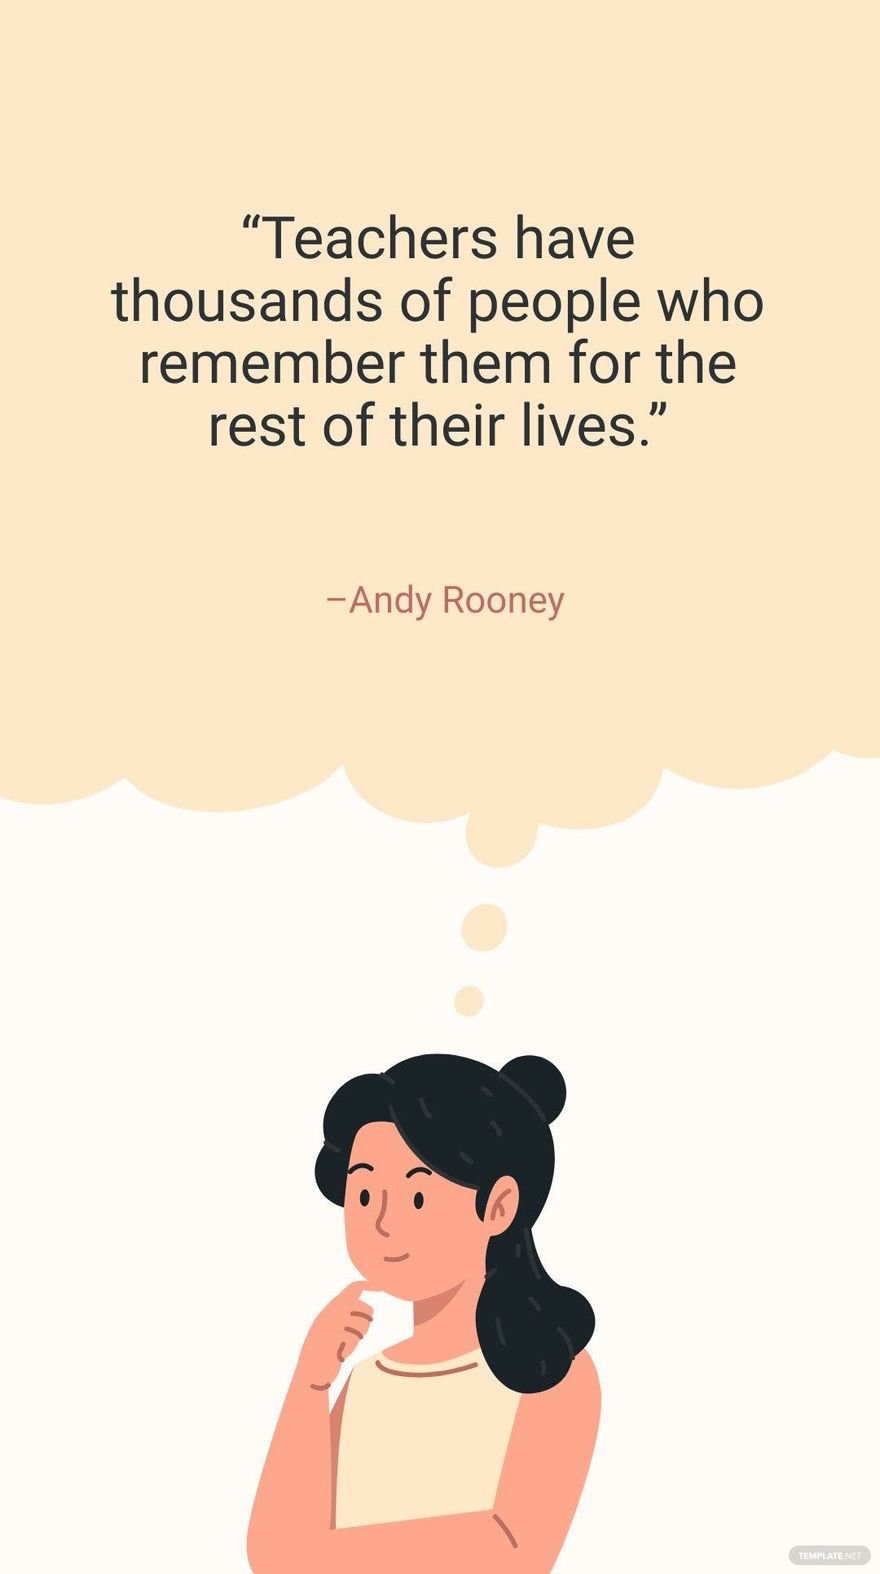 Free Andy Rooney - Teachers have thousands of people who remember them for the rest of their lives. in JPG